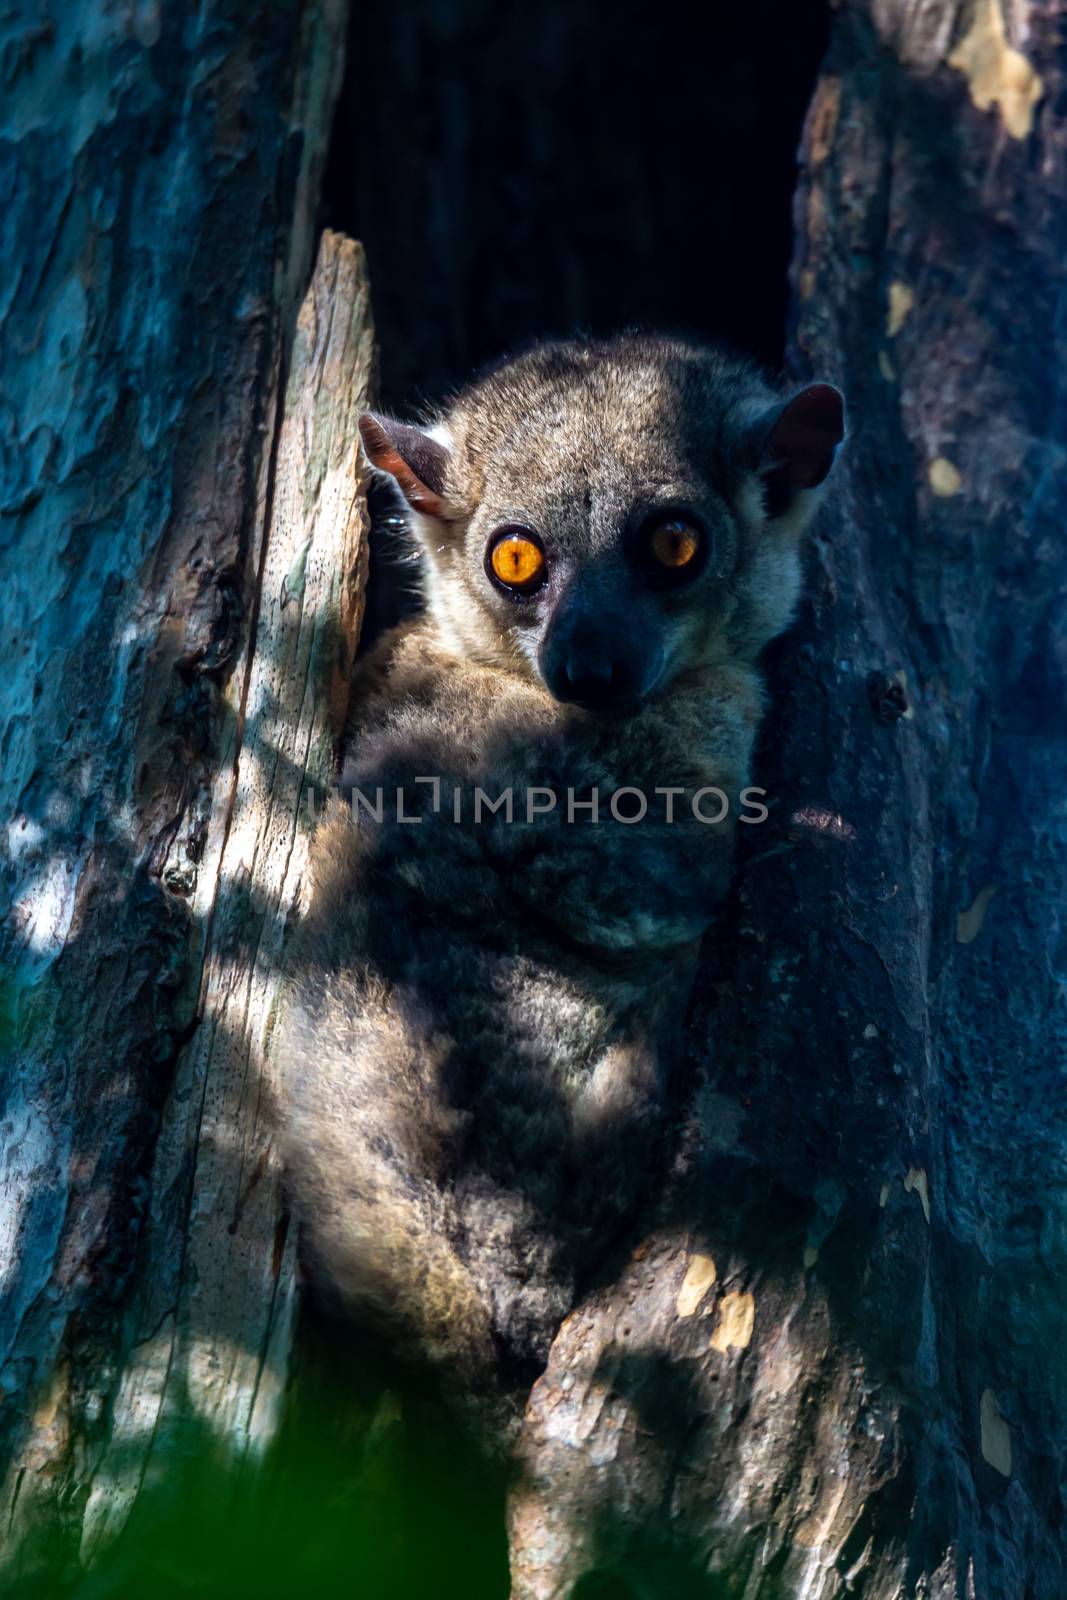 Little lemur hid in the hollow of a tree and watches by 25ehaag6